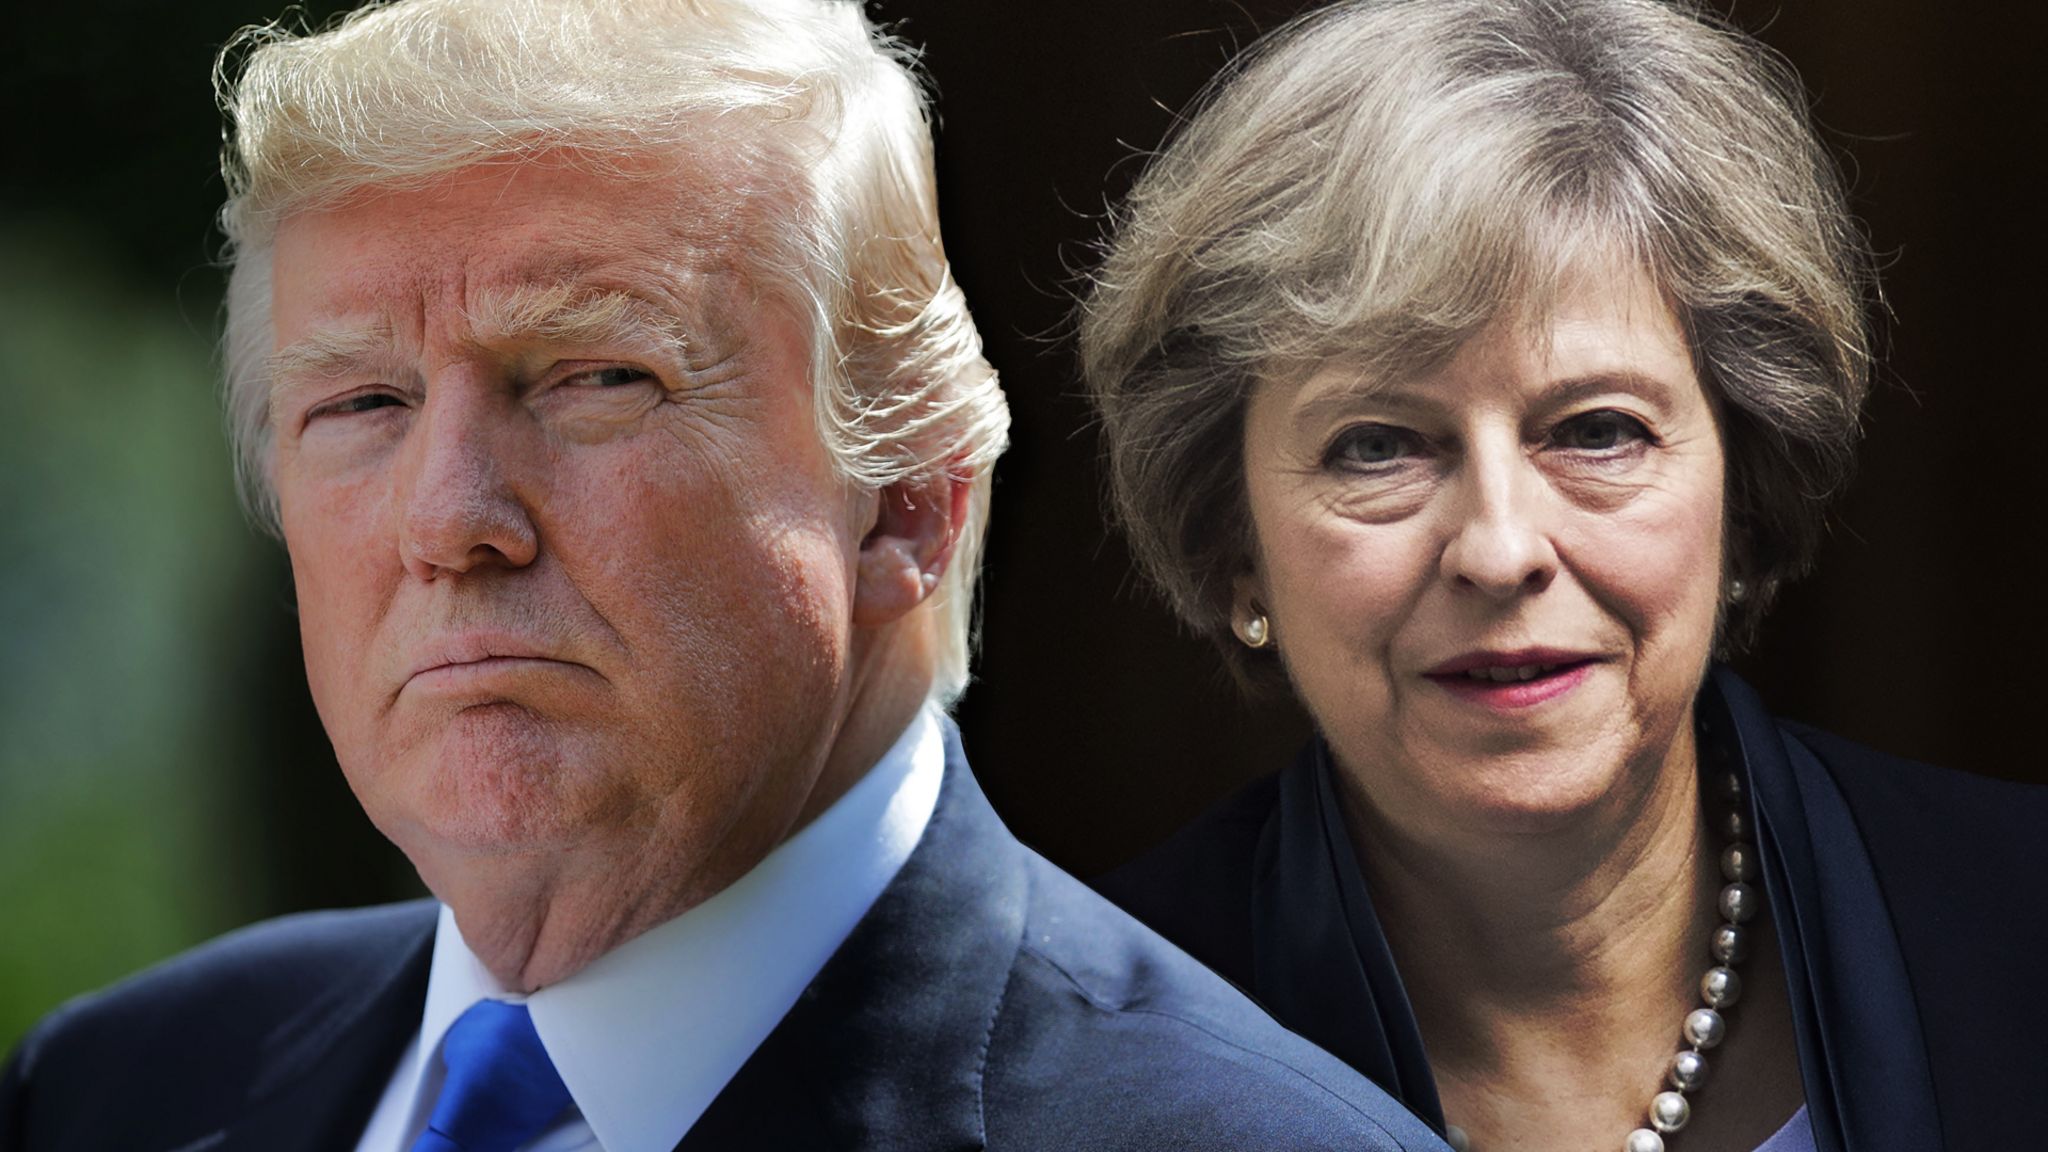 Donald Trump looks stern as Theresa May looks out into the distance behind him